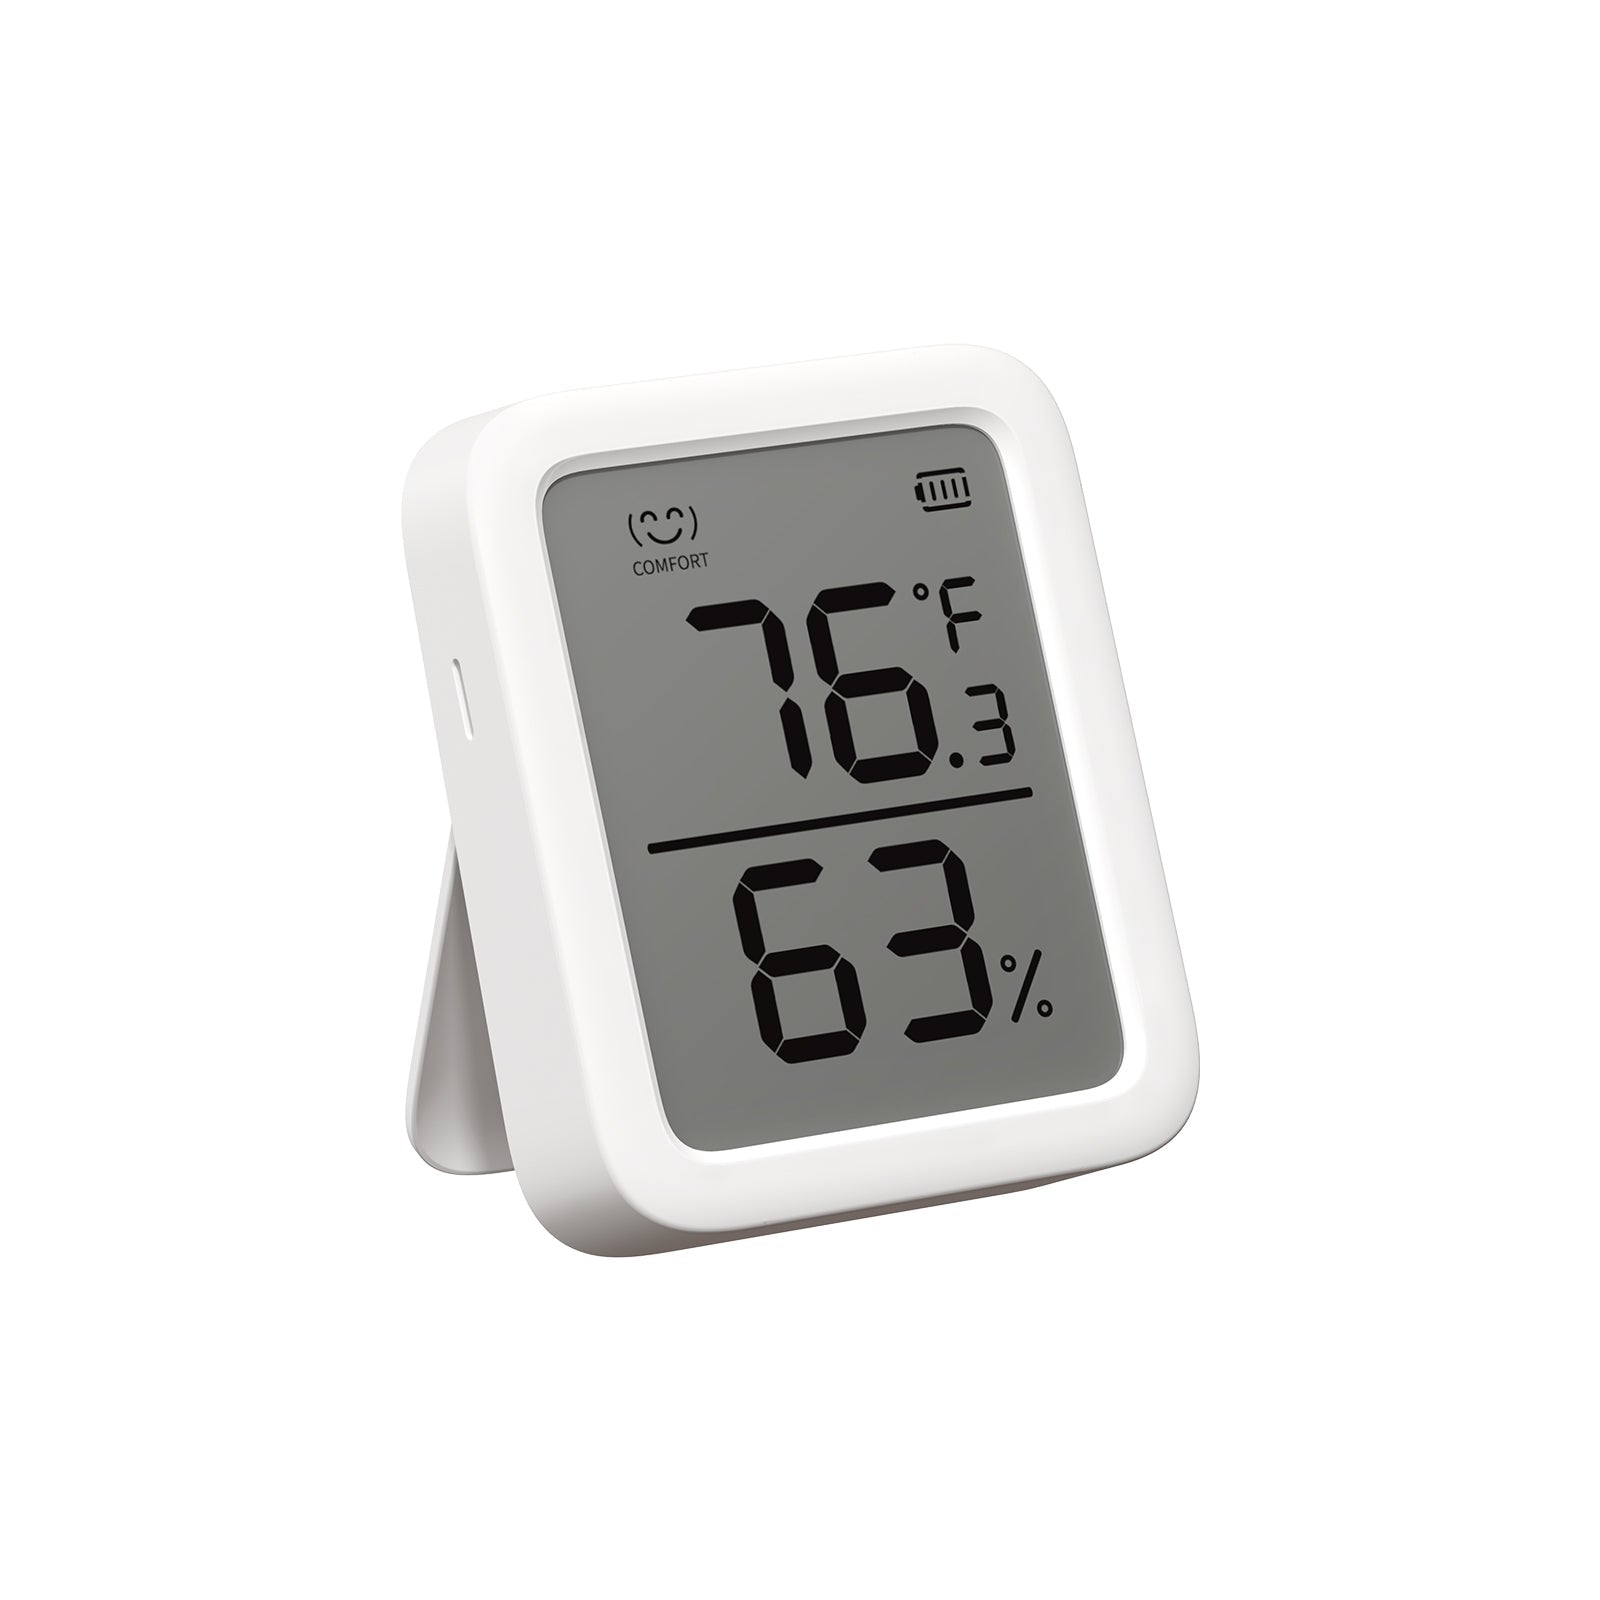 SwitchBot Thermometer Hygrometer, Most Accurate Digital Hygrometer